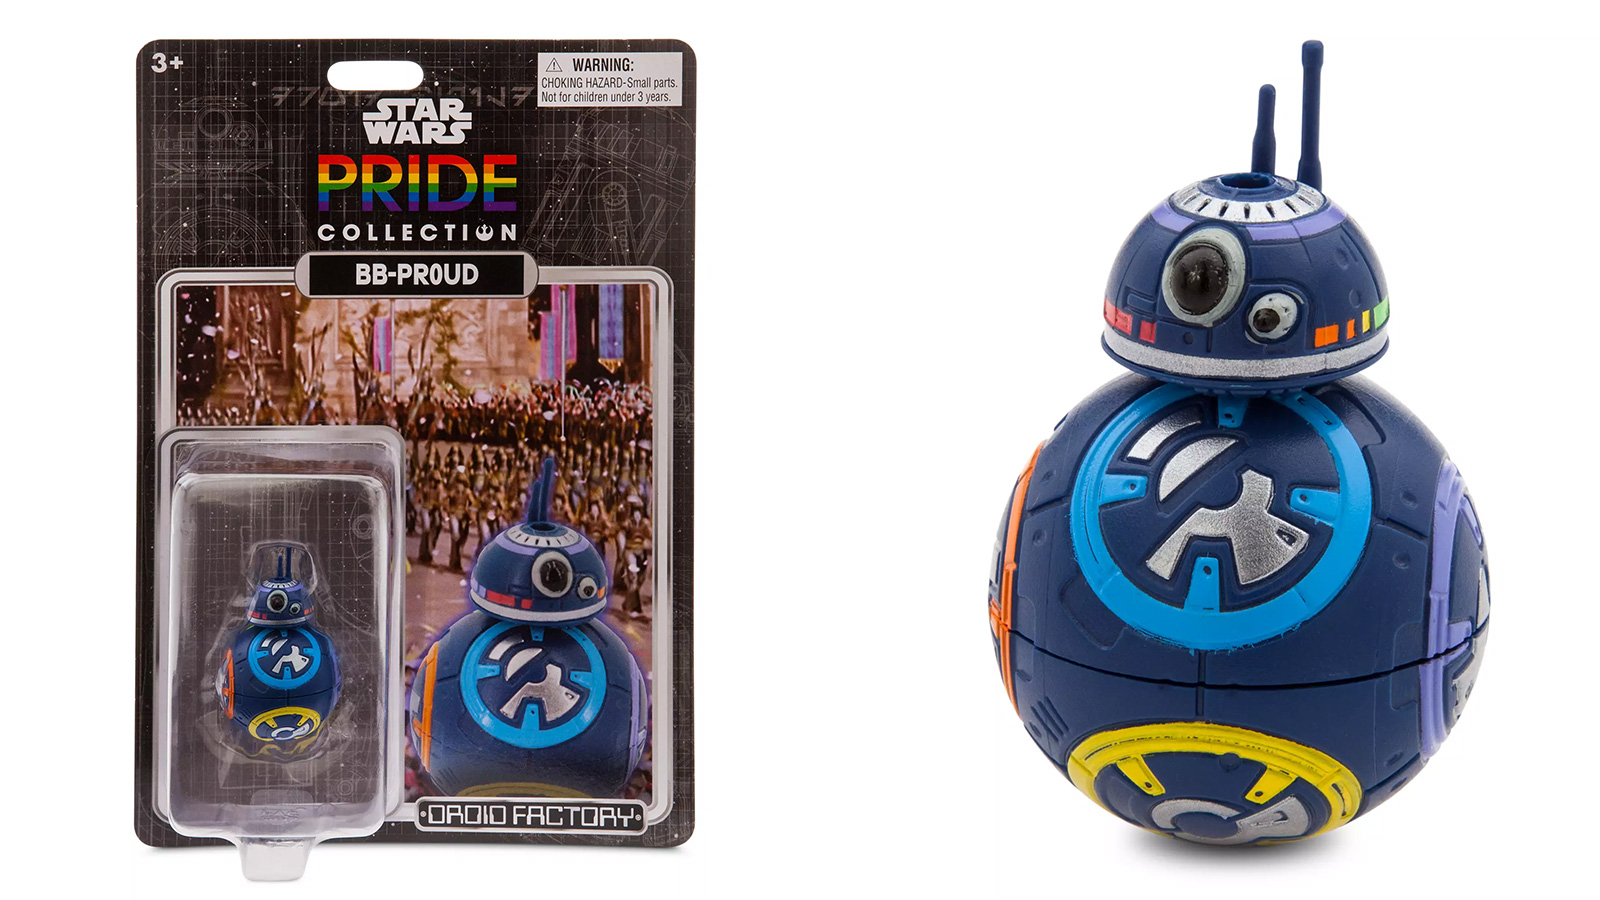 In Stock At ShopDisney.com - Exclusive Droid Factory Pride Collection BB-Pr0ud Droid